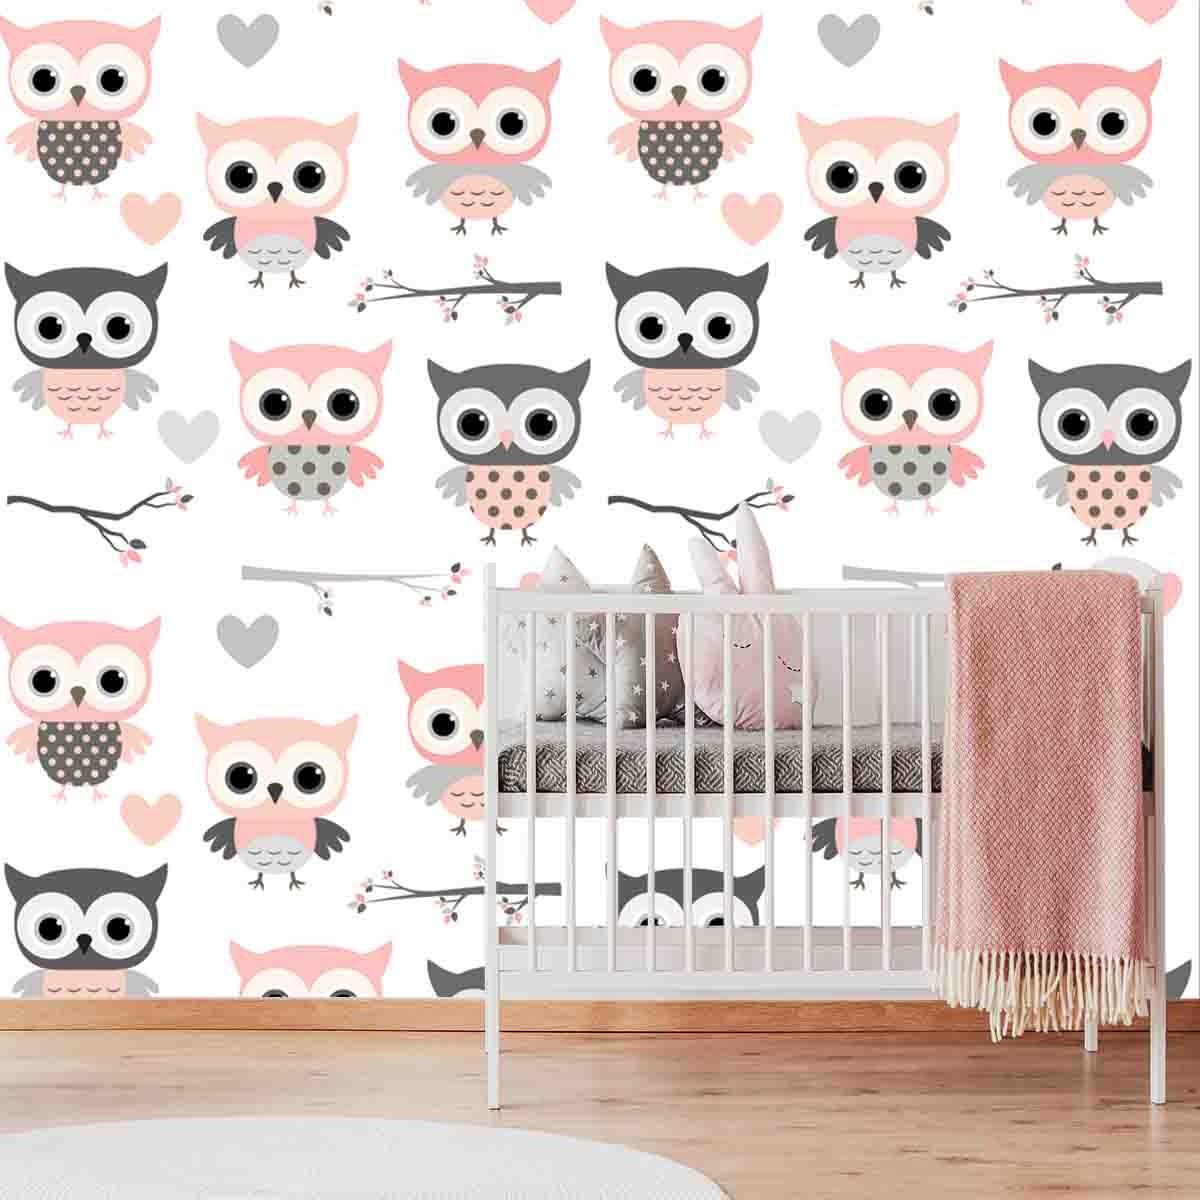 Cute Pattern with Cartoon Owls, Hearts and Branches in Pink and Grey Colors Wallpaper Girl Nursery Mural